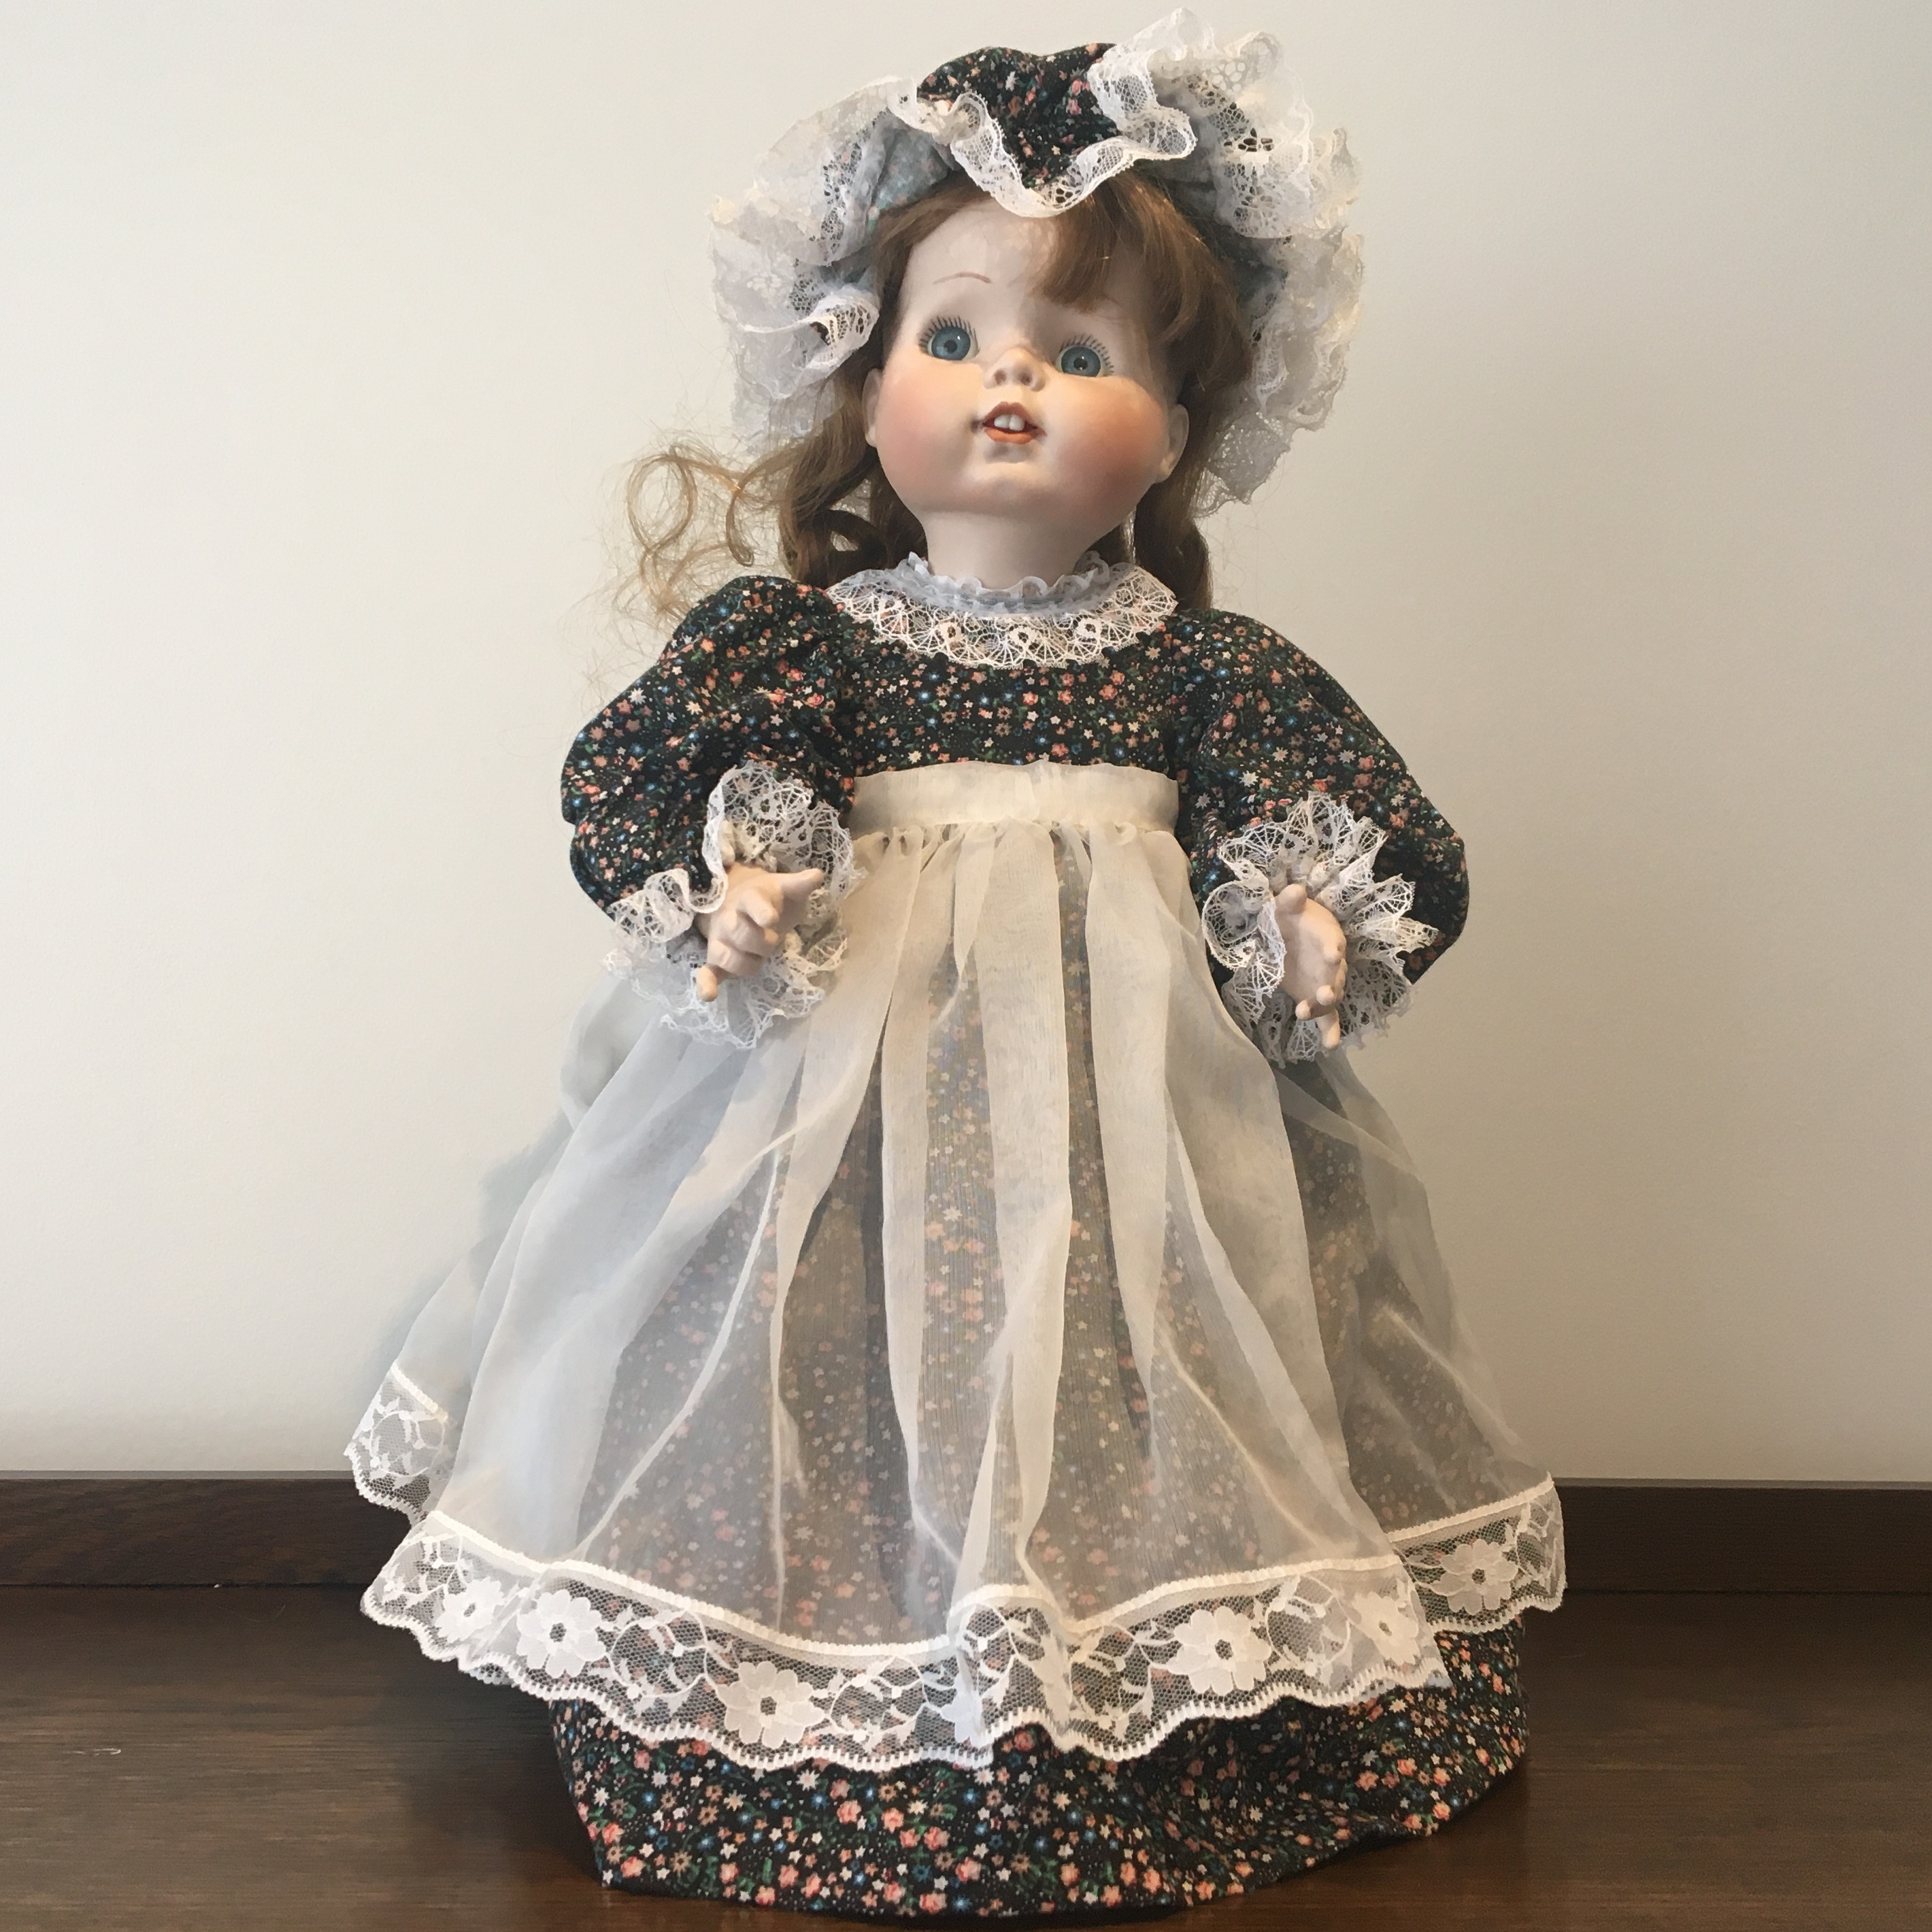 19-inch modern doll with brown hair, calico dress and bonnet, and white apron